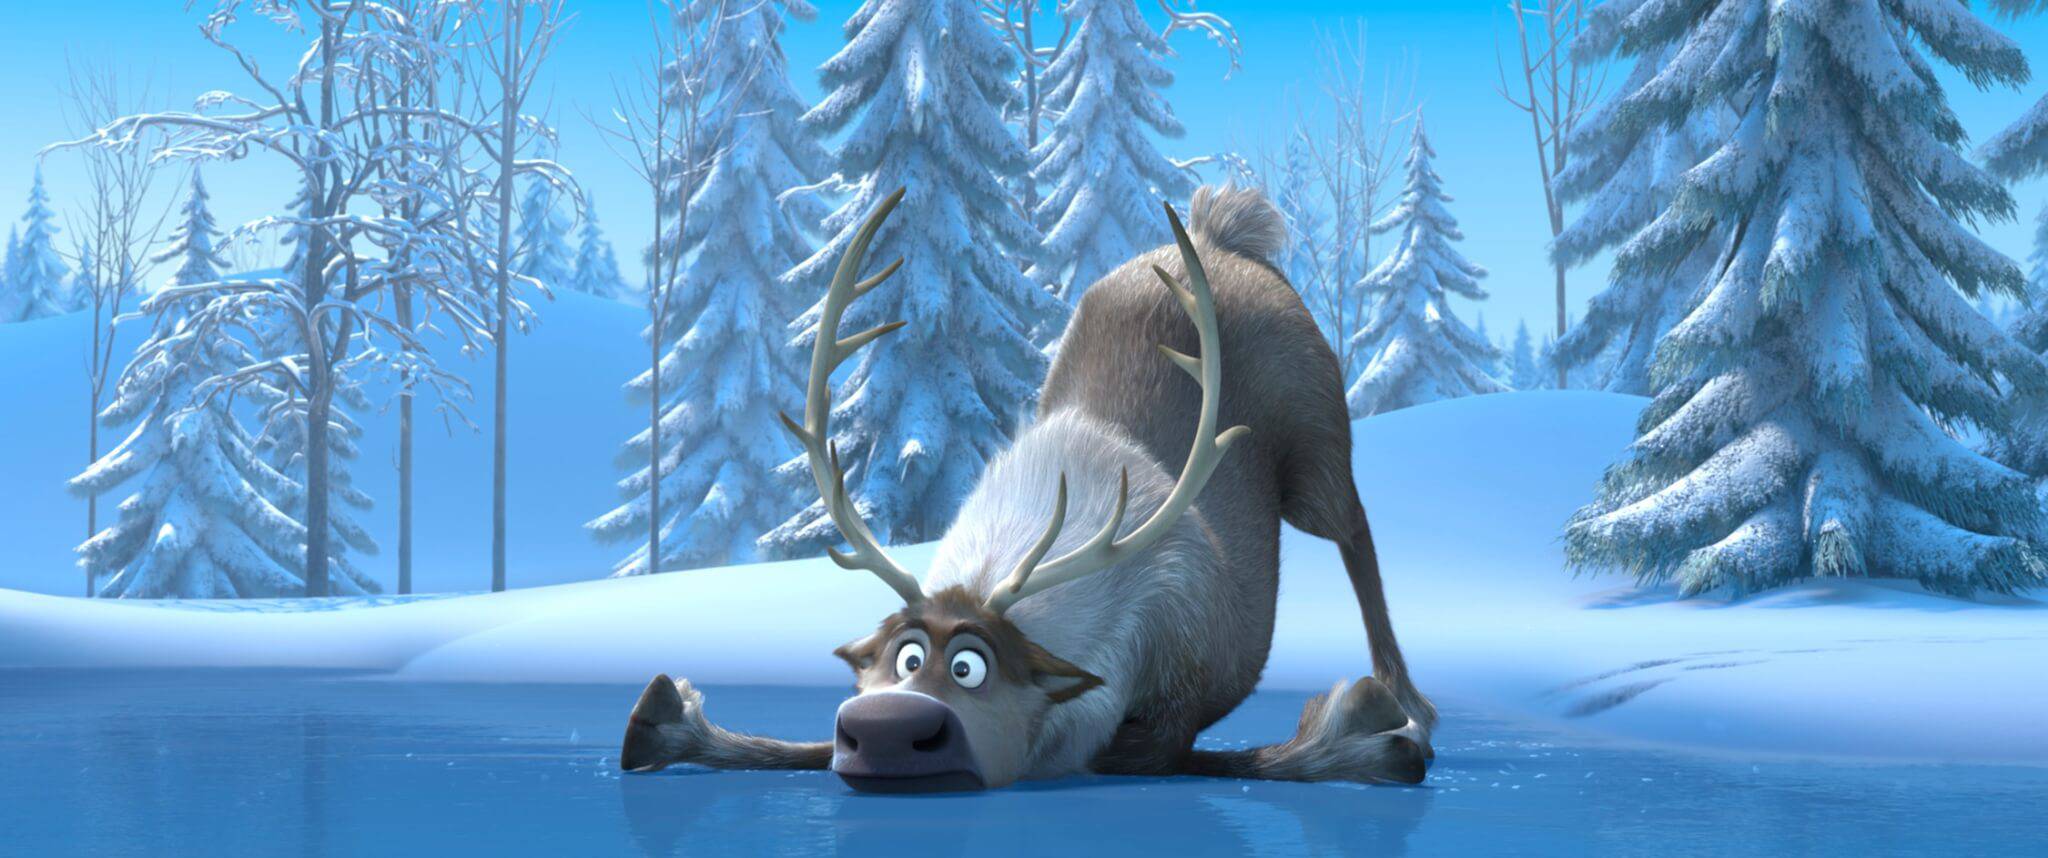 SVEN. ©2013 Disney. All Rights Reserved.